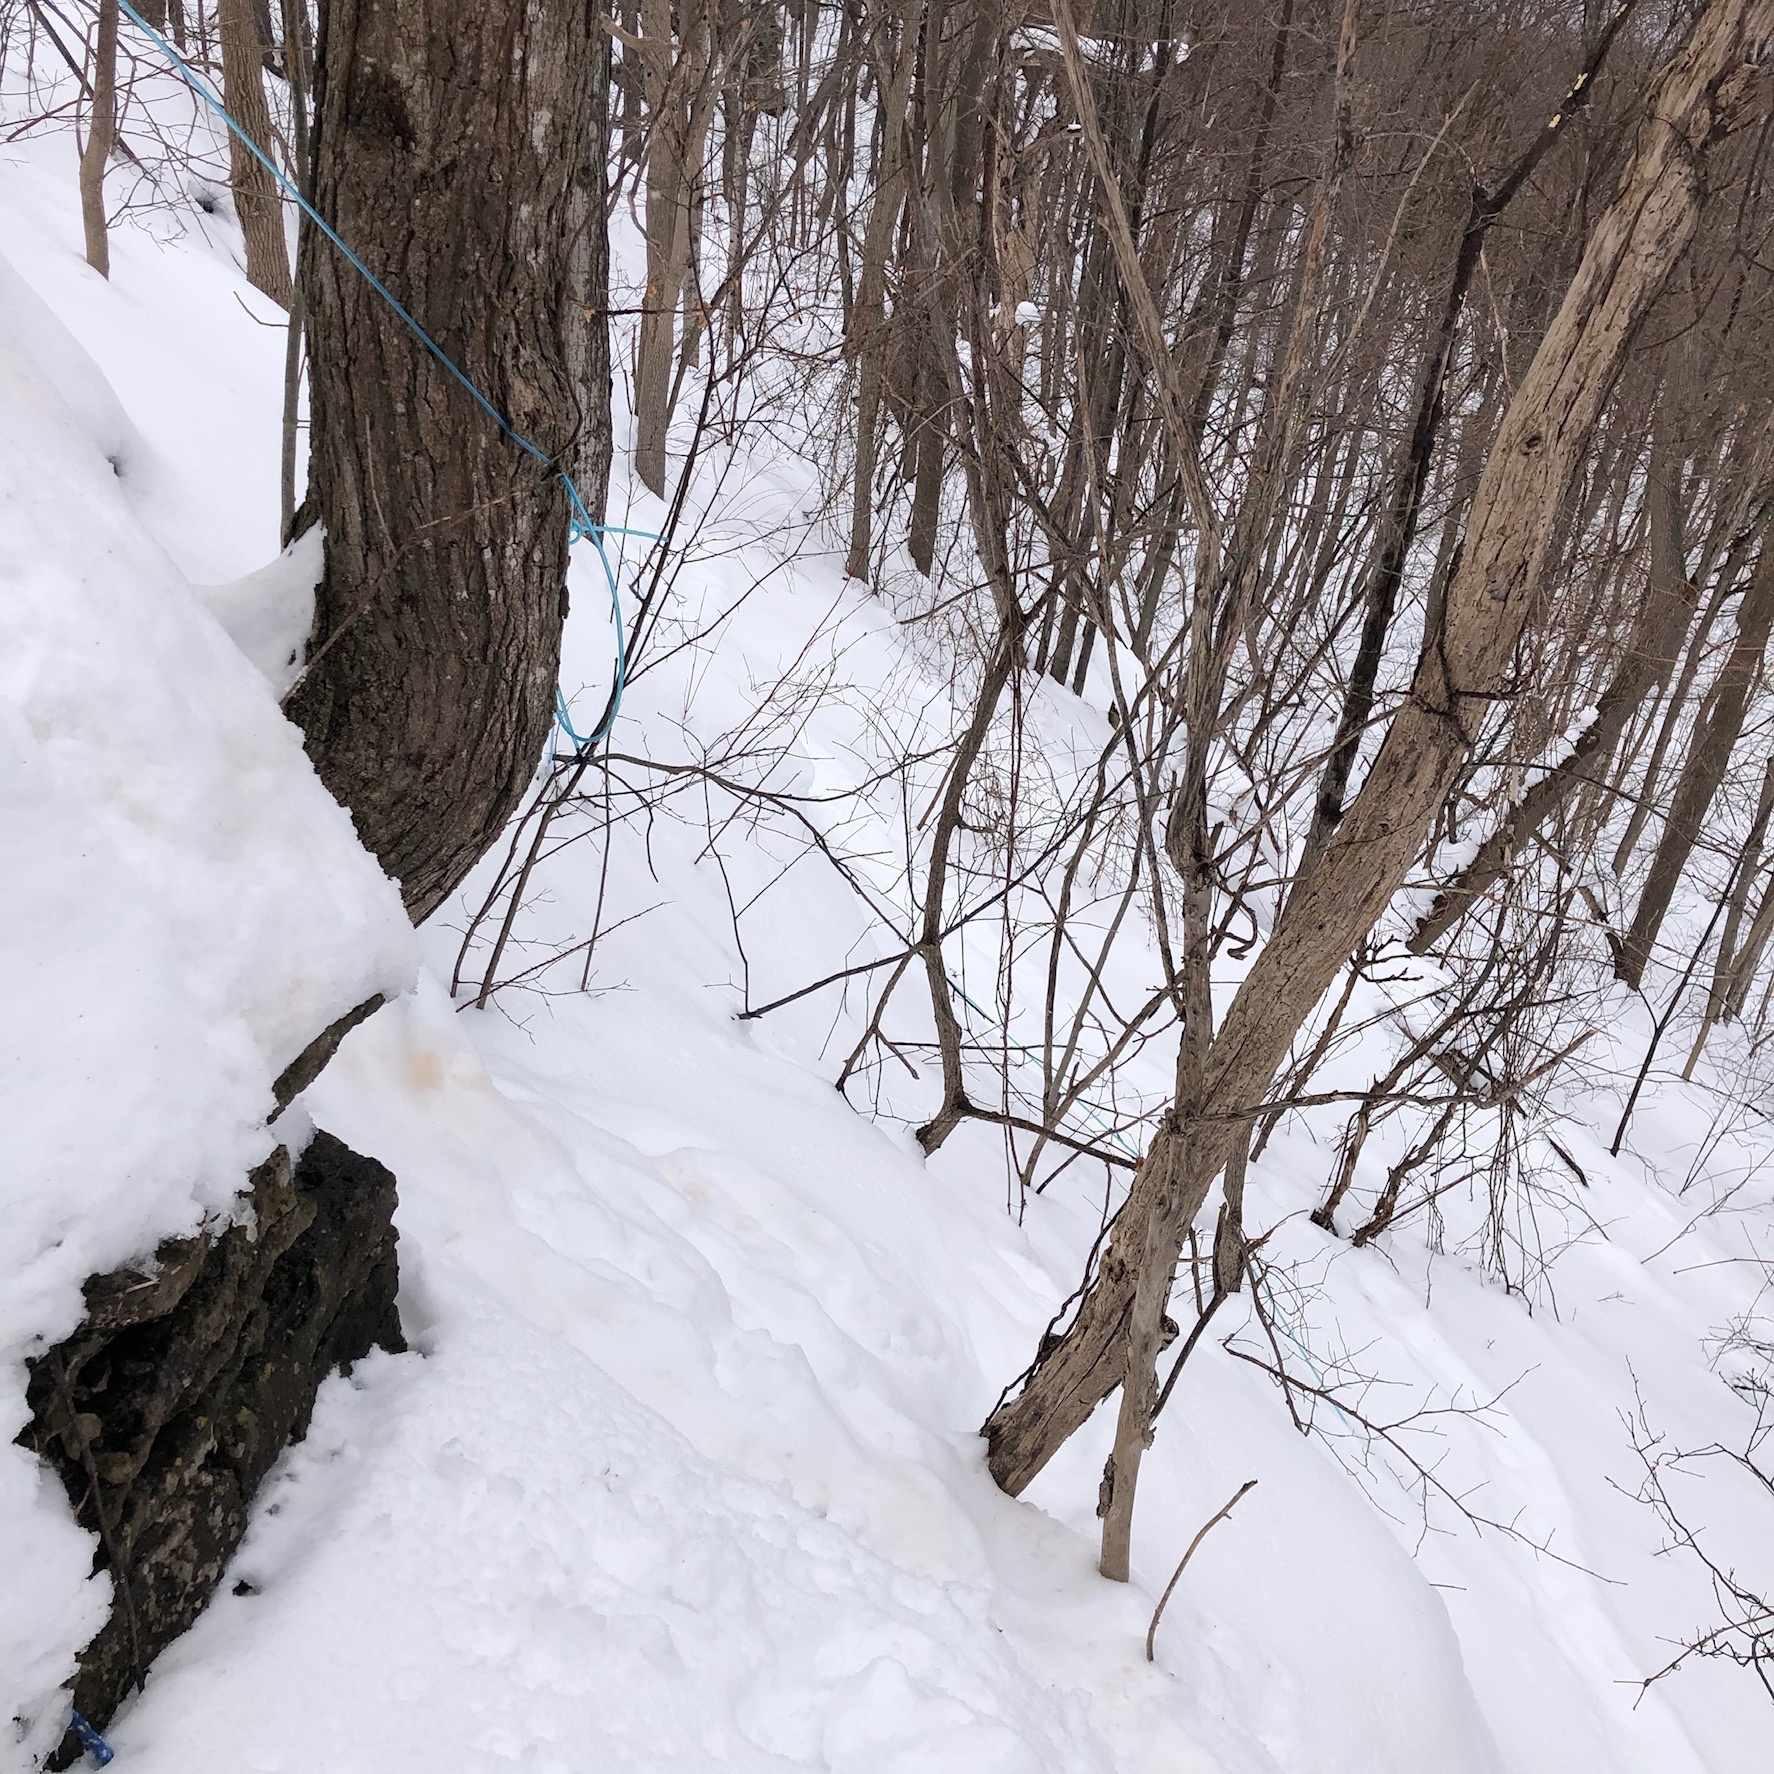 blue tubing at about a 45 degree angle and wraps around a maple tree. there is rock in the foreground and several small trees. the ground is snow-covered